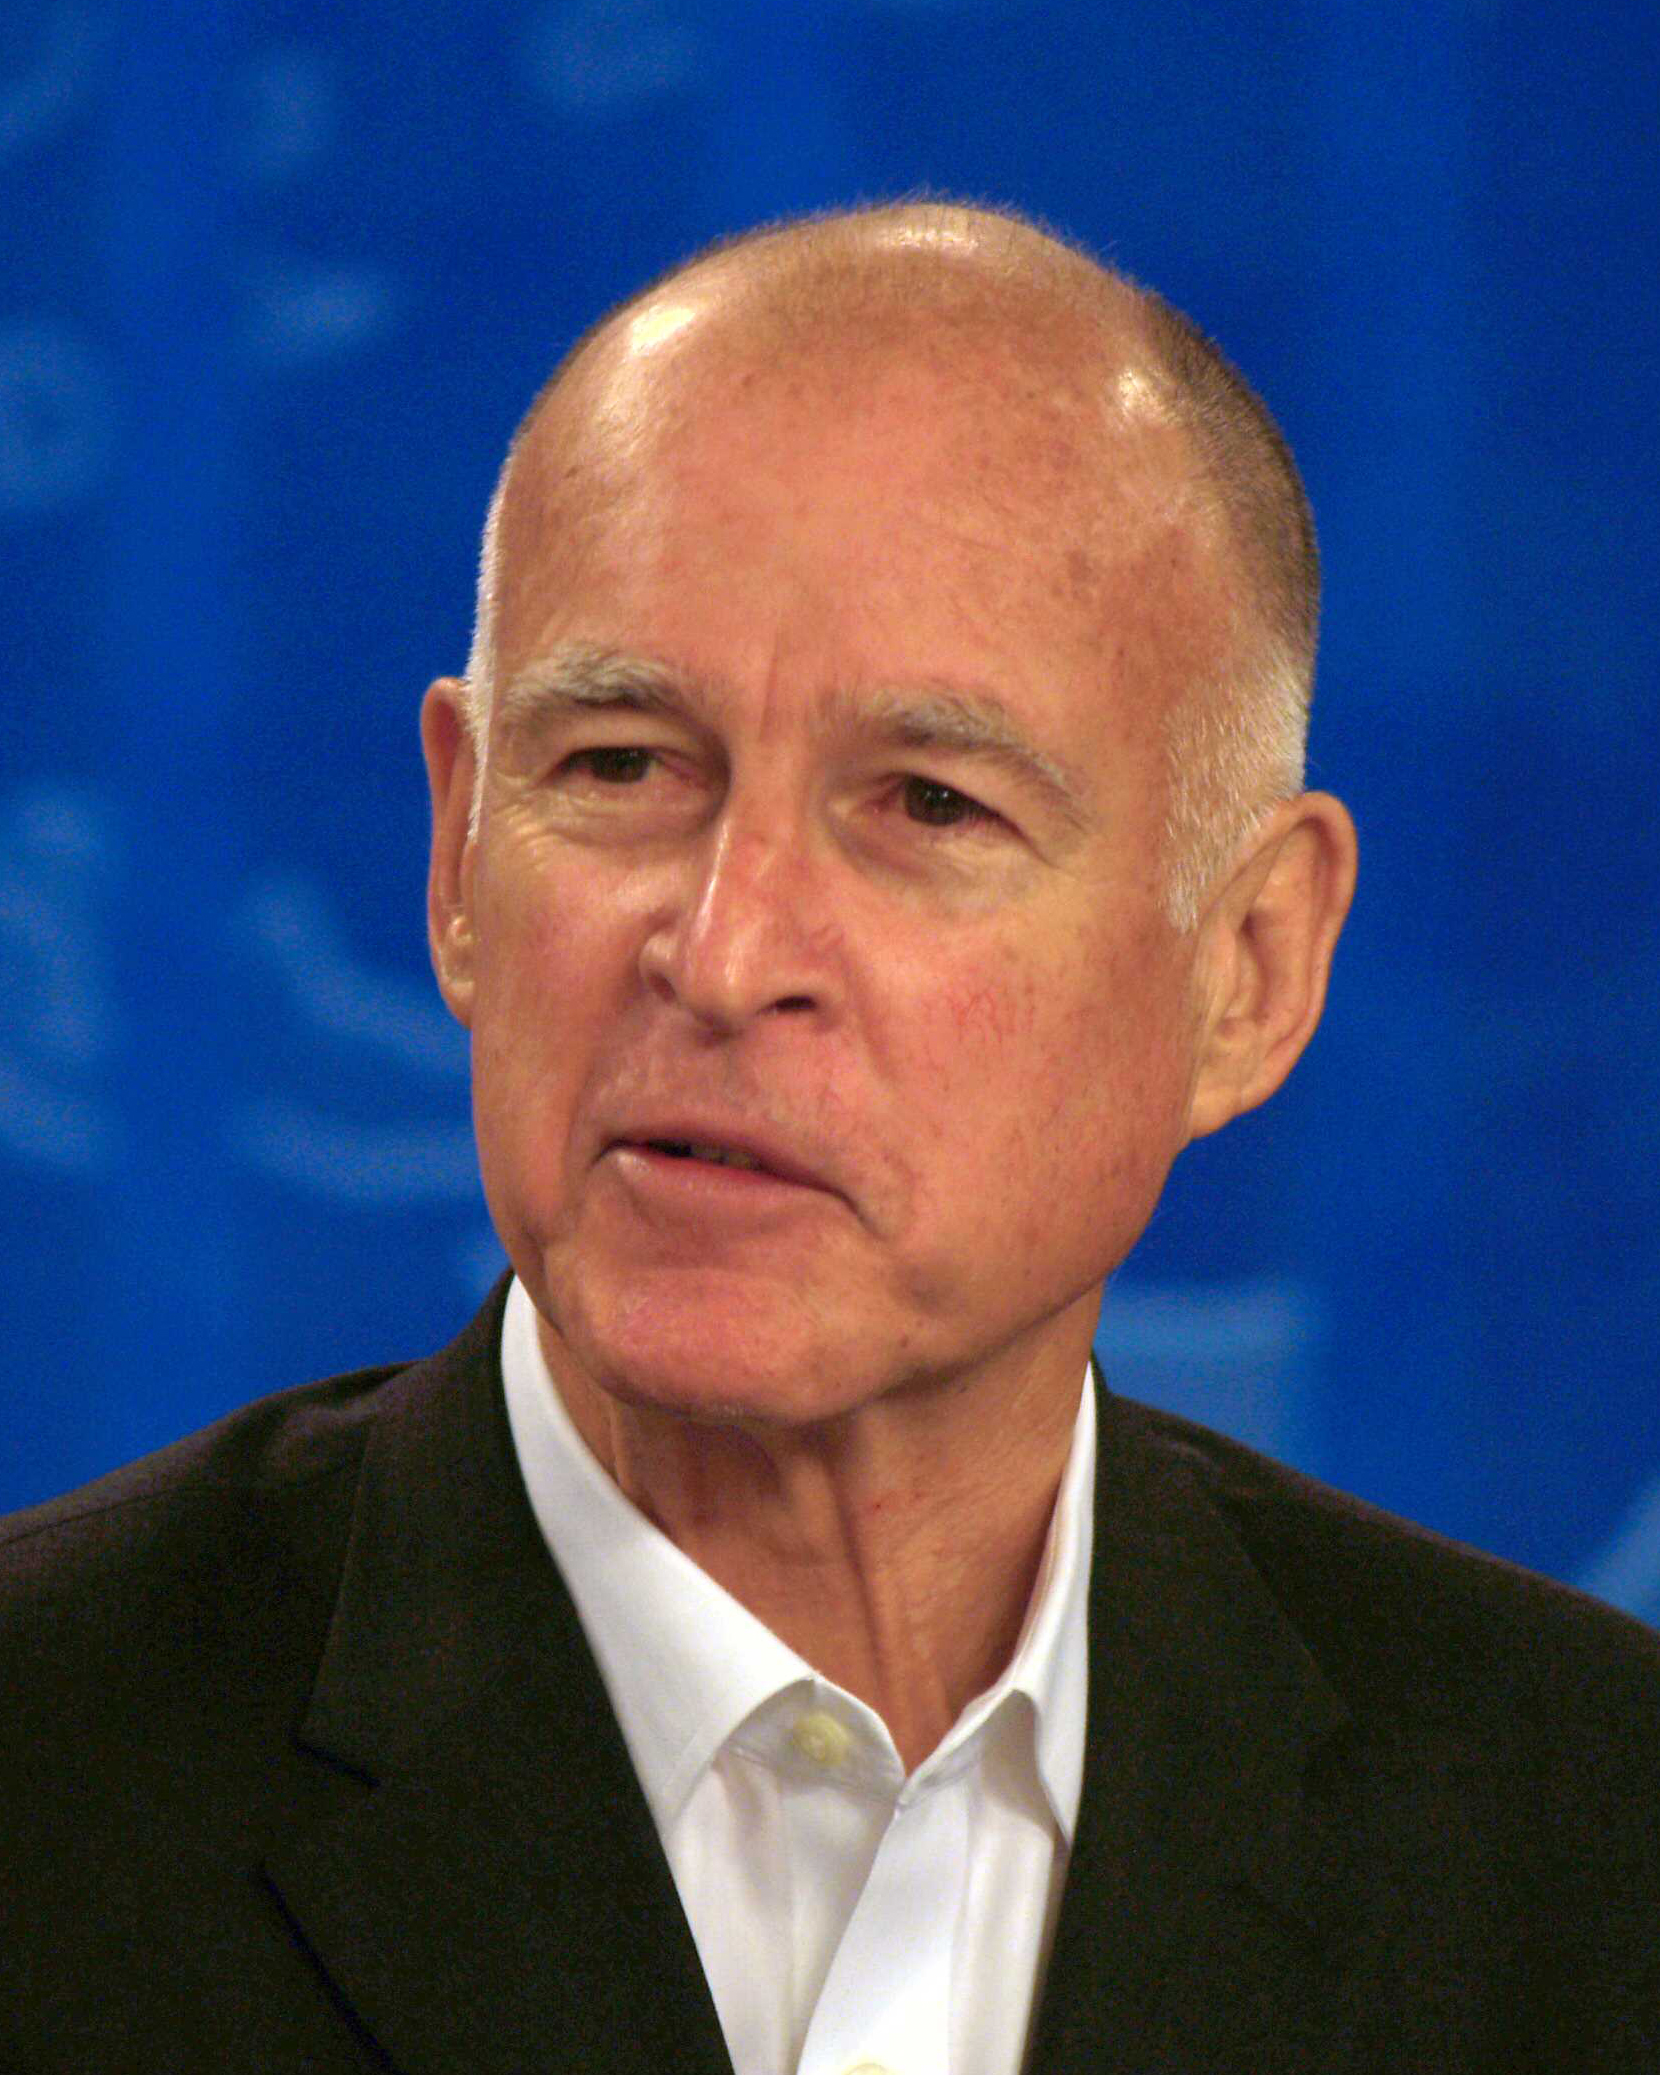 a bald man wearing a black suit and white shirt